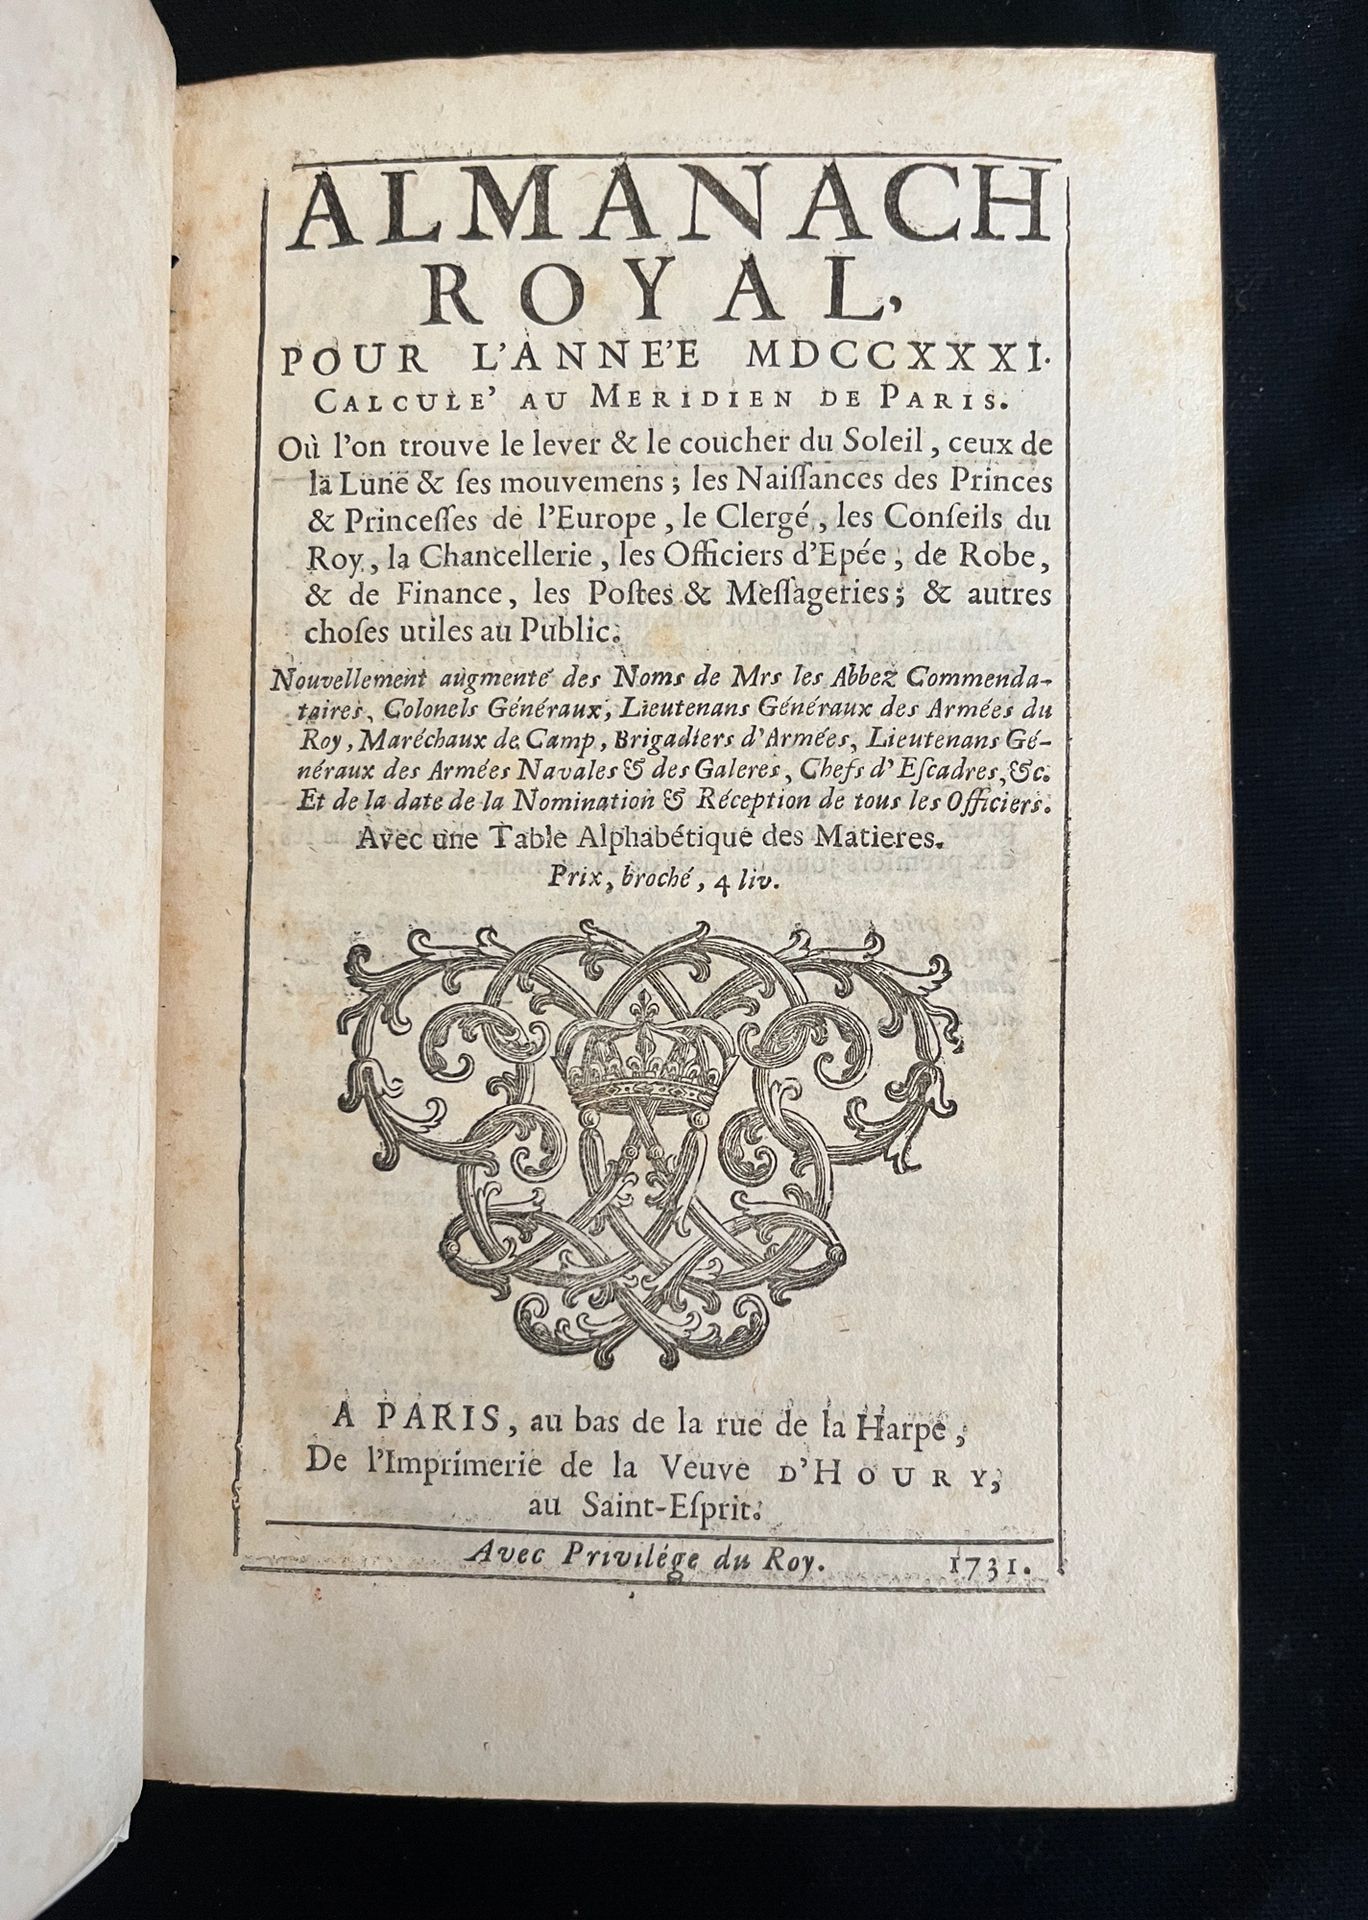 Null [ALMANACH]
Royal almanac for the year MDCCXXXI. Paris at the home of the wi&hellip;